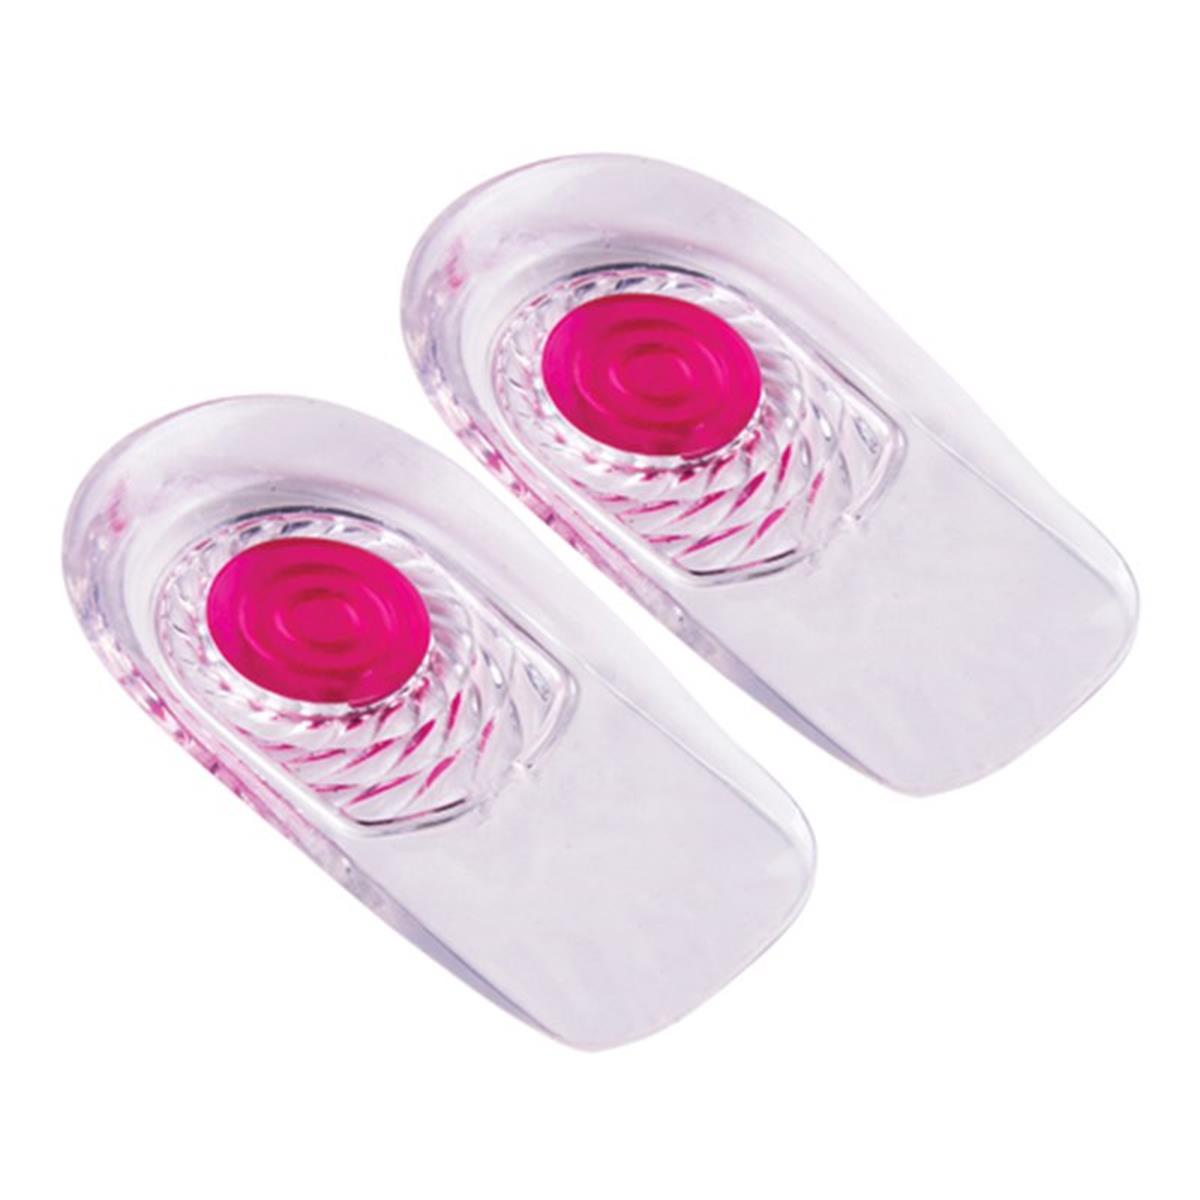 P5040l Double-action Gel Heel Cushion For Ladies - Pair